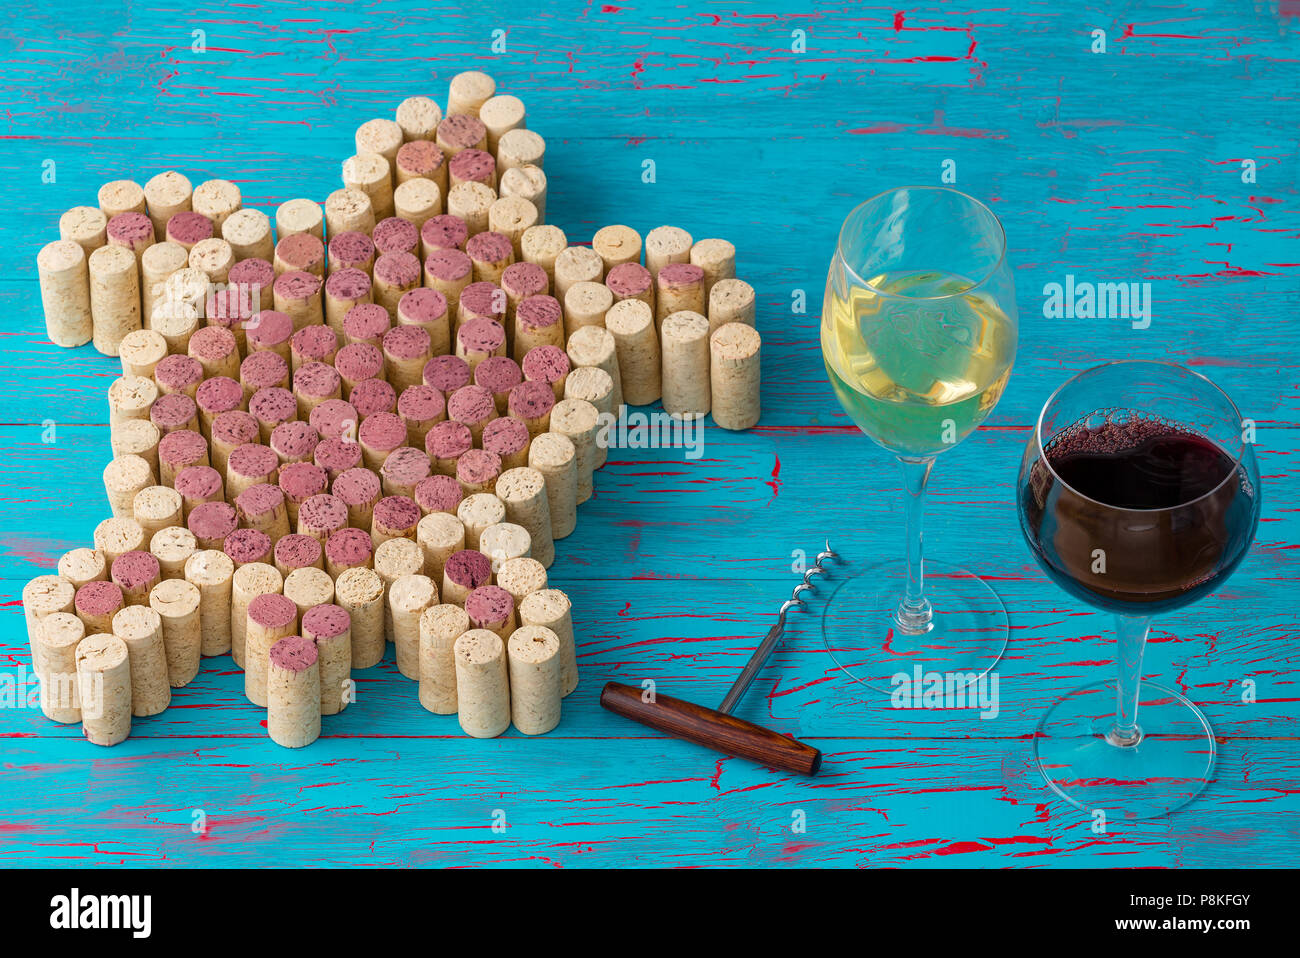 Creative design of a sea turtle from red and white wine bottle corks on a textured turquoise blue wood background with glasses of wine and a corkscrew Stock Photo